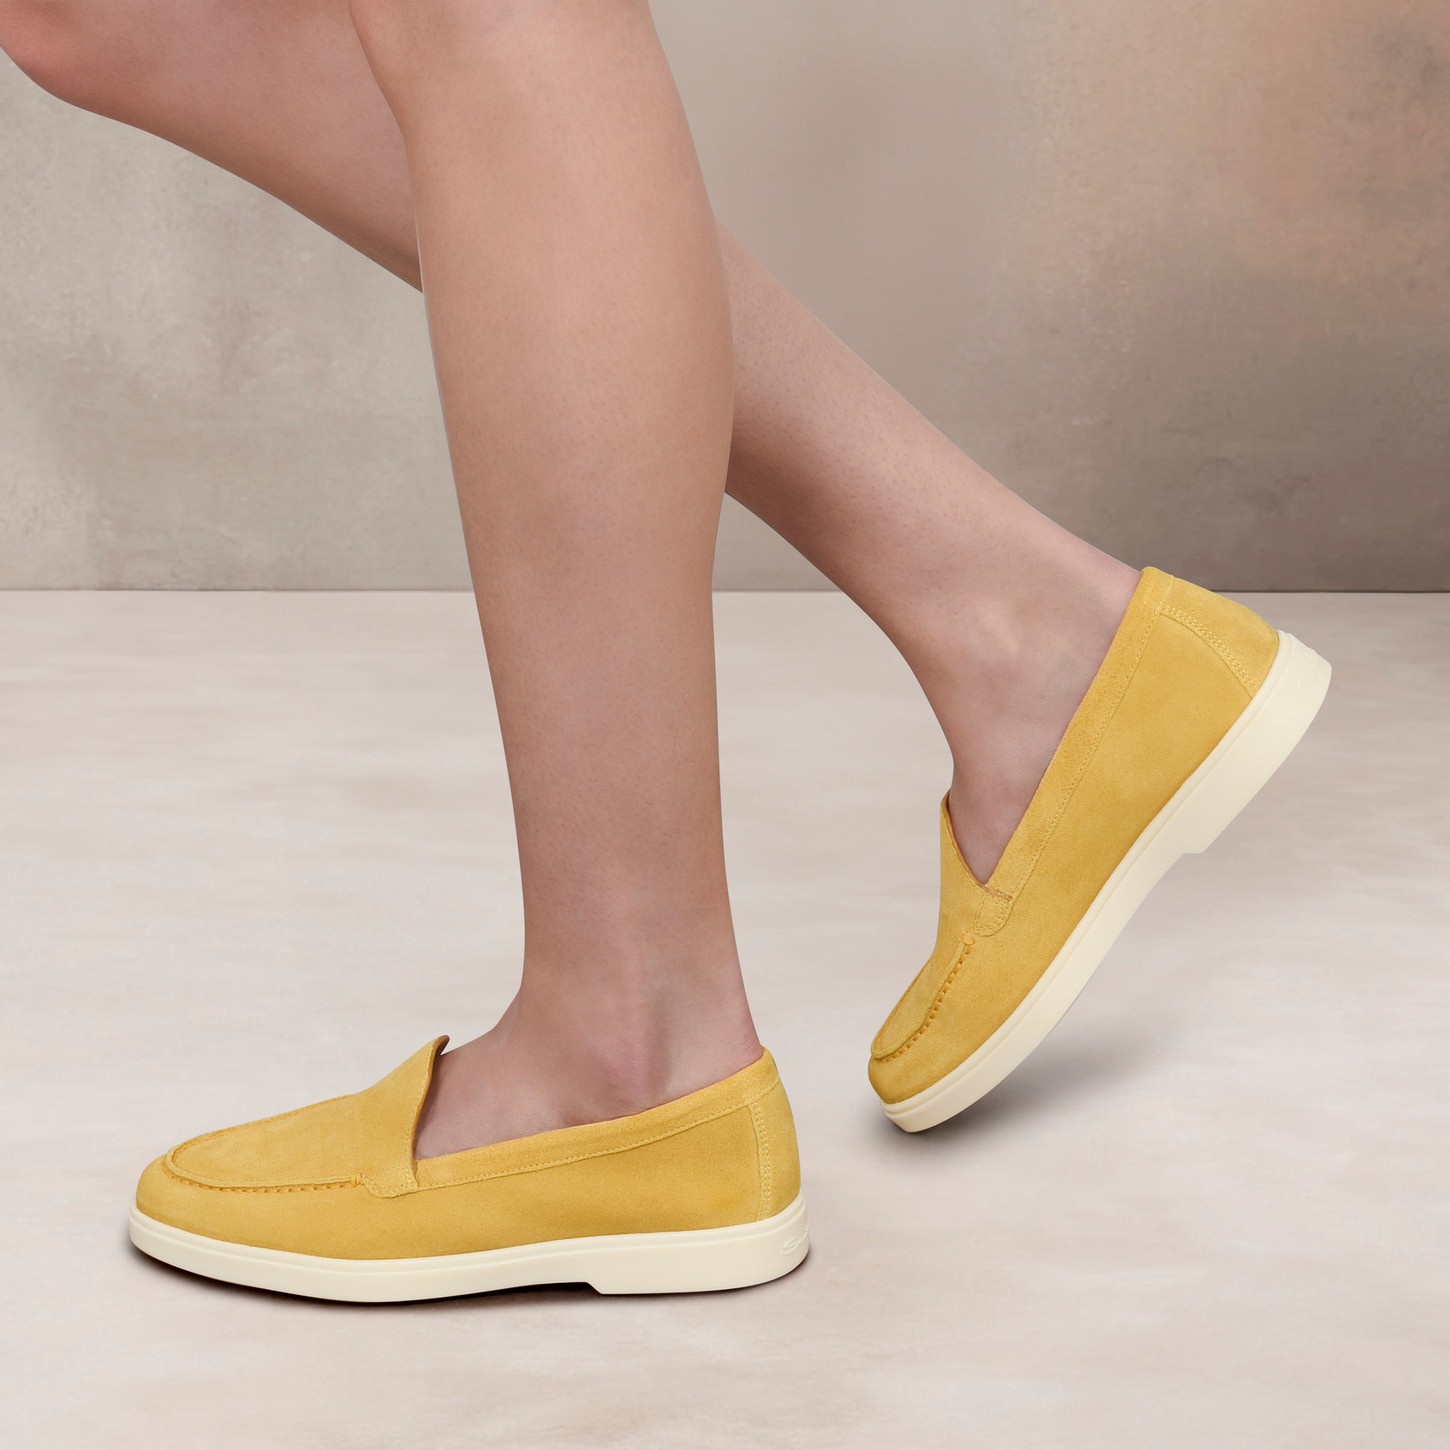 Women's yellow suede loafer - 2